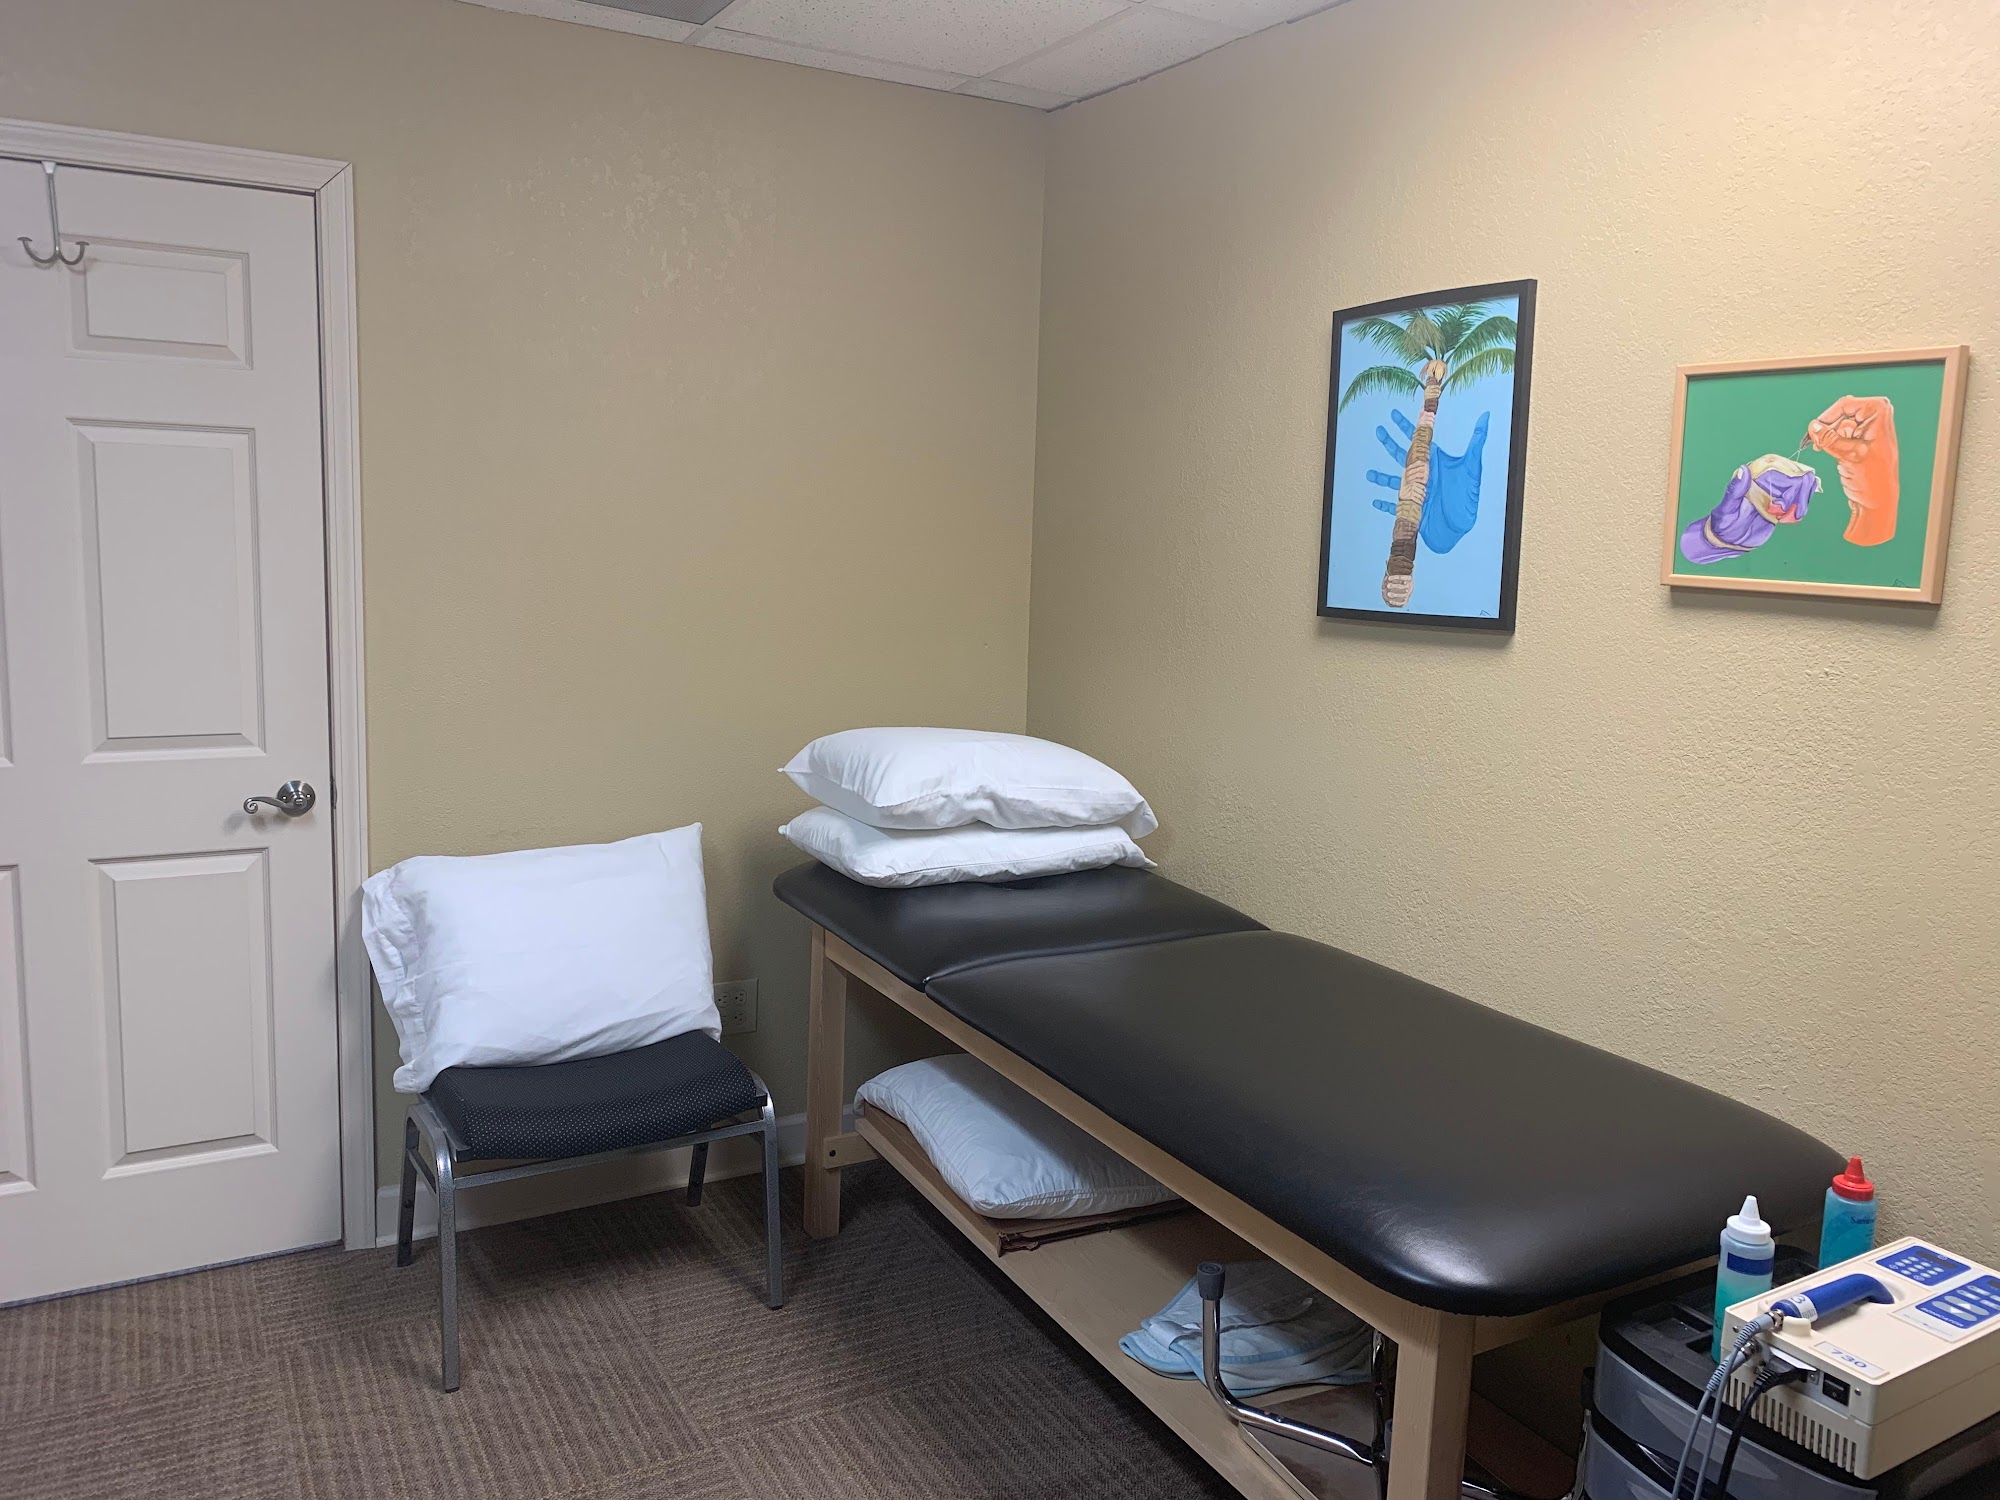 BenchMark Physical Therapy 190 Old Orchard Square, East Ellijay Georgia 30540